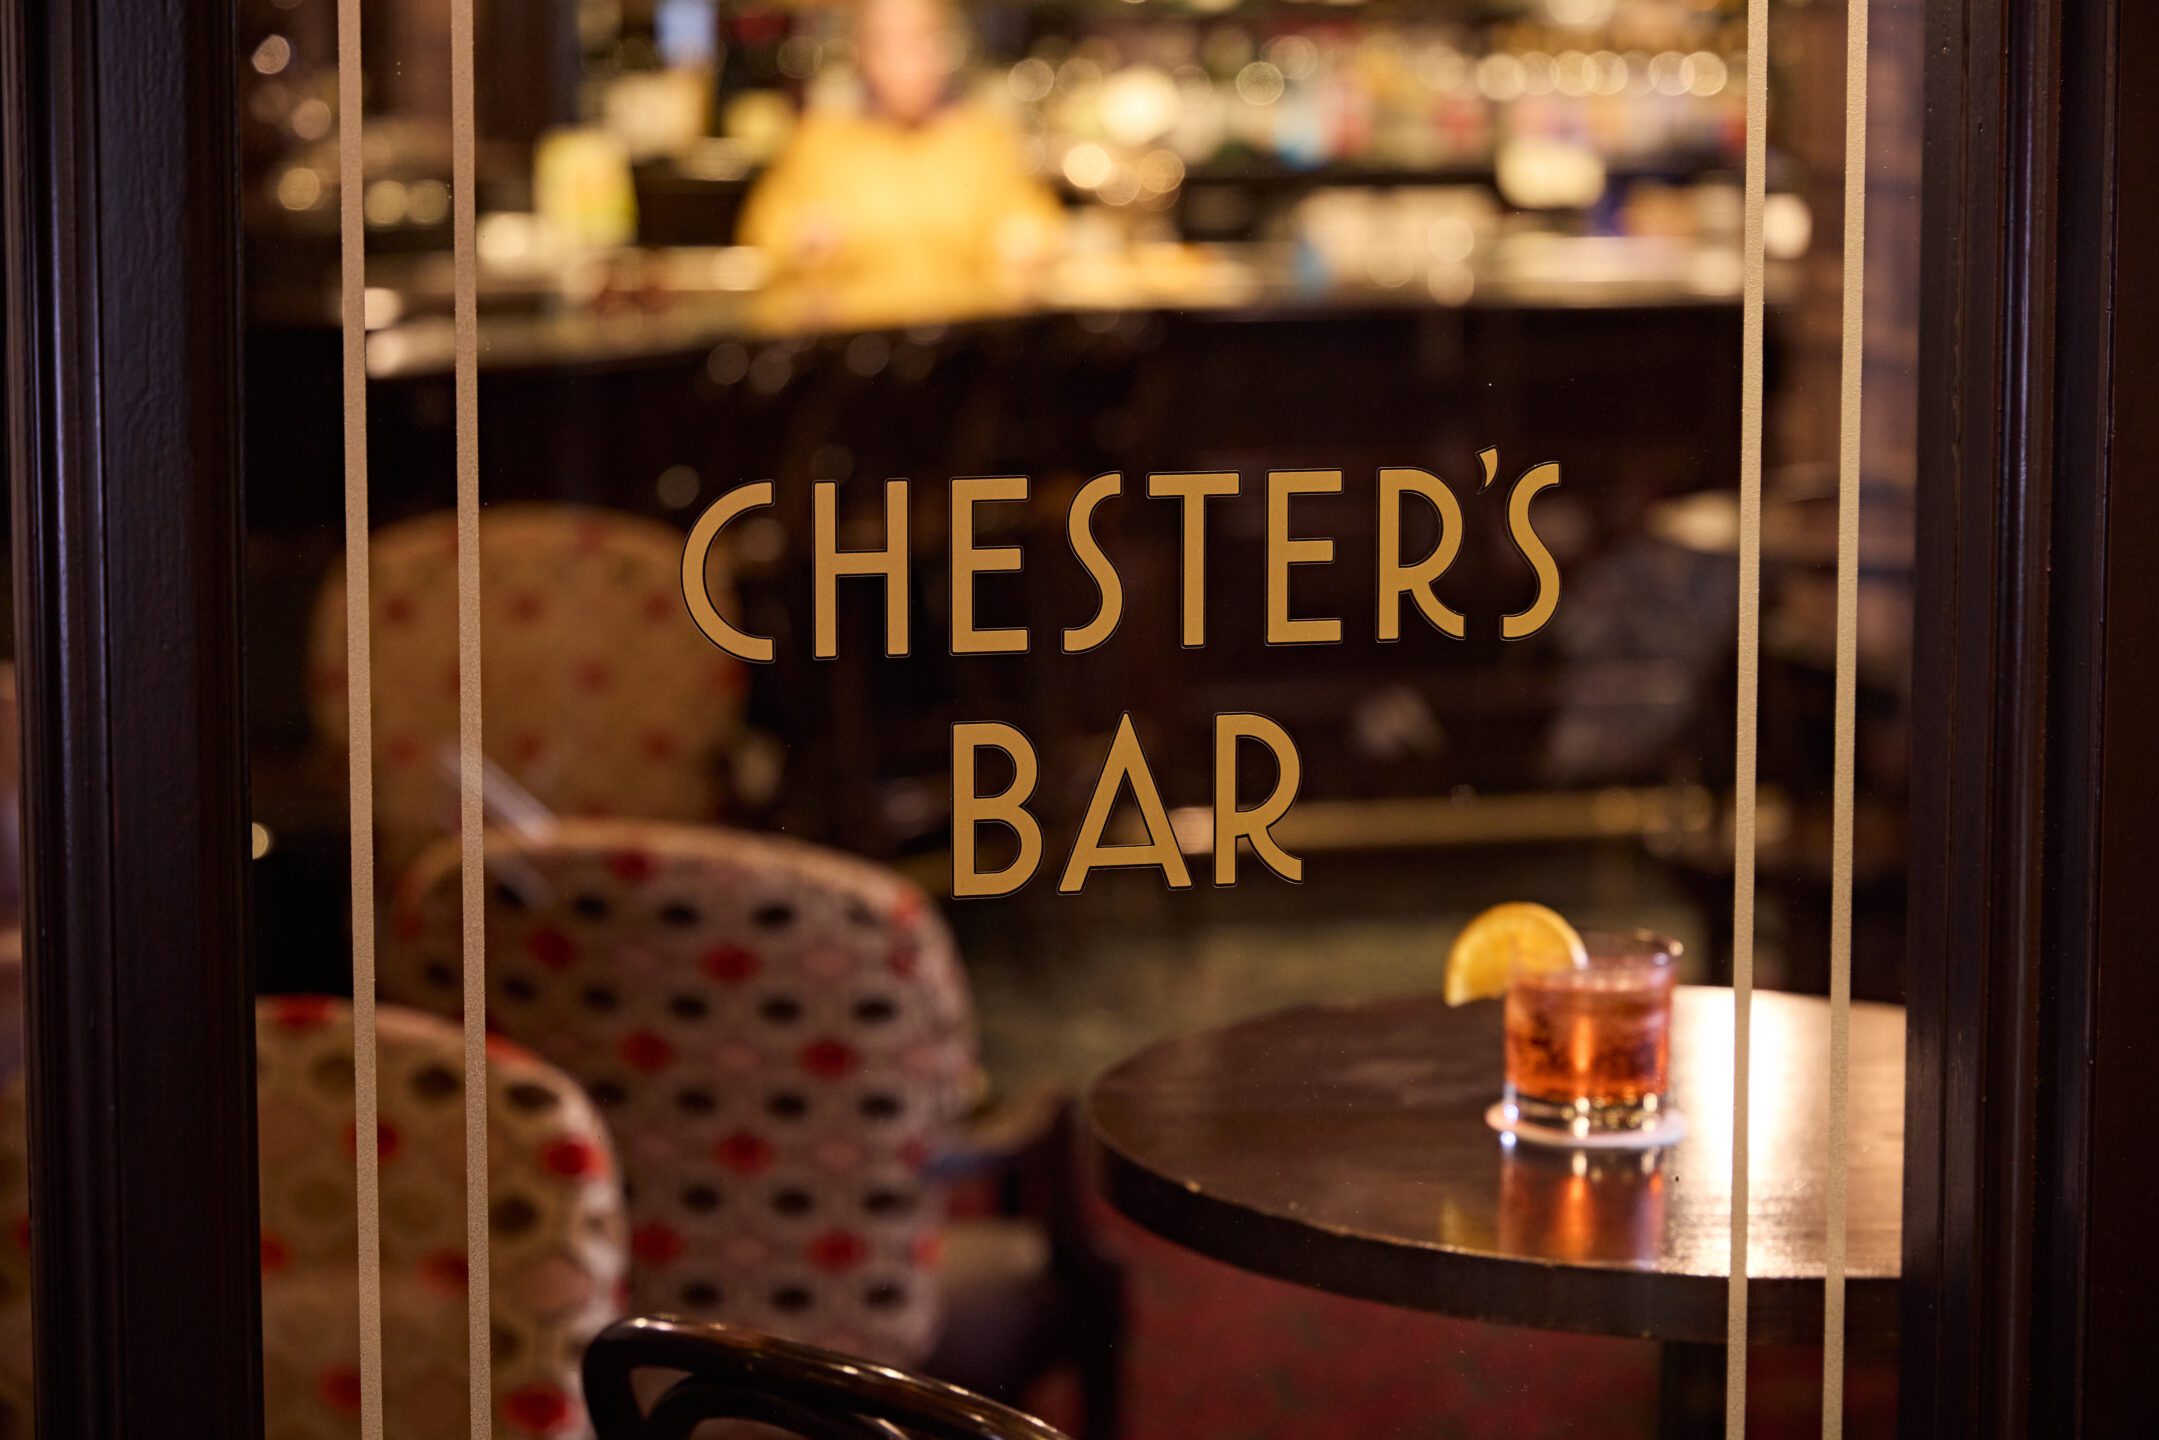 Chesters Bar